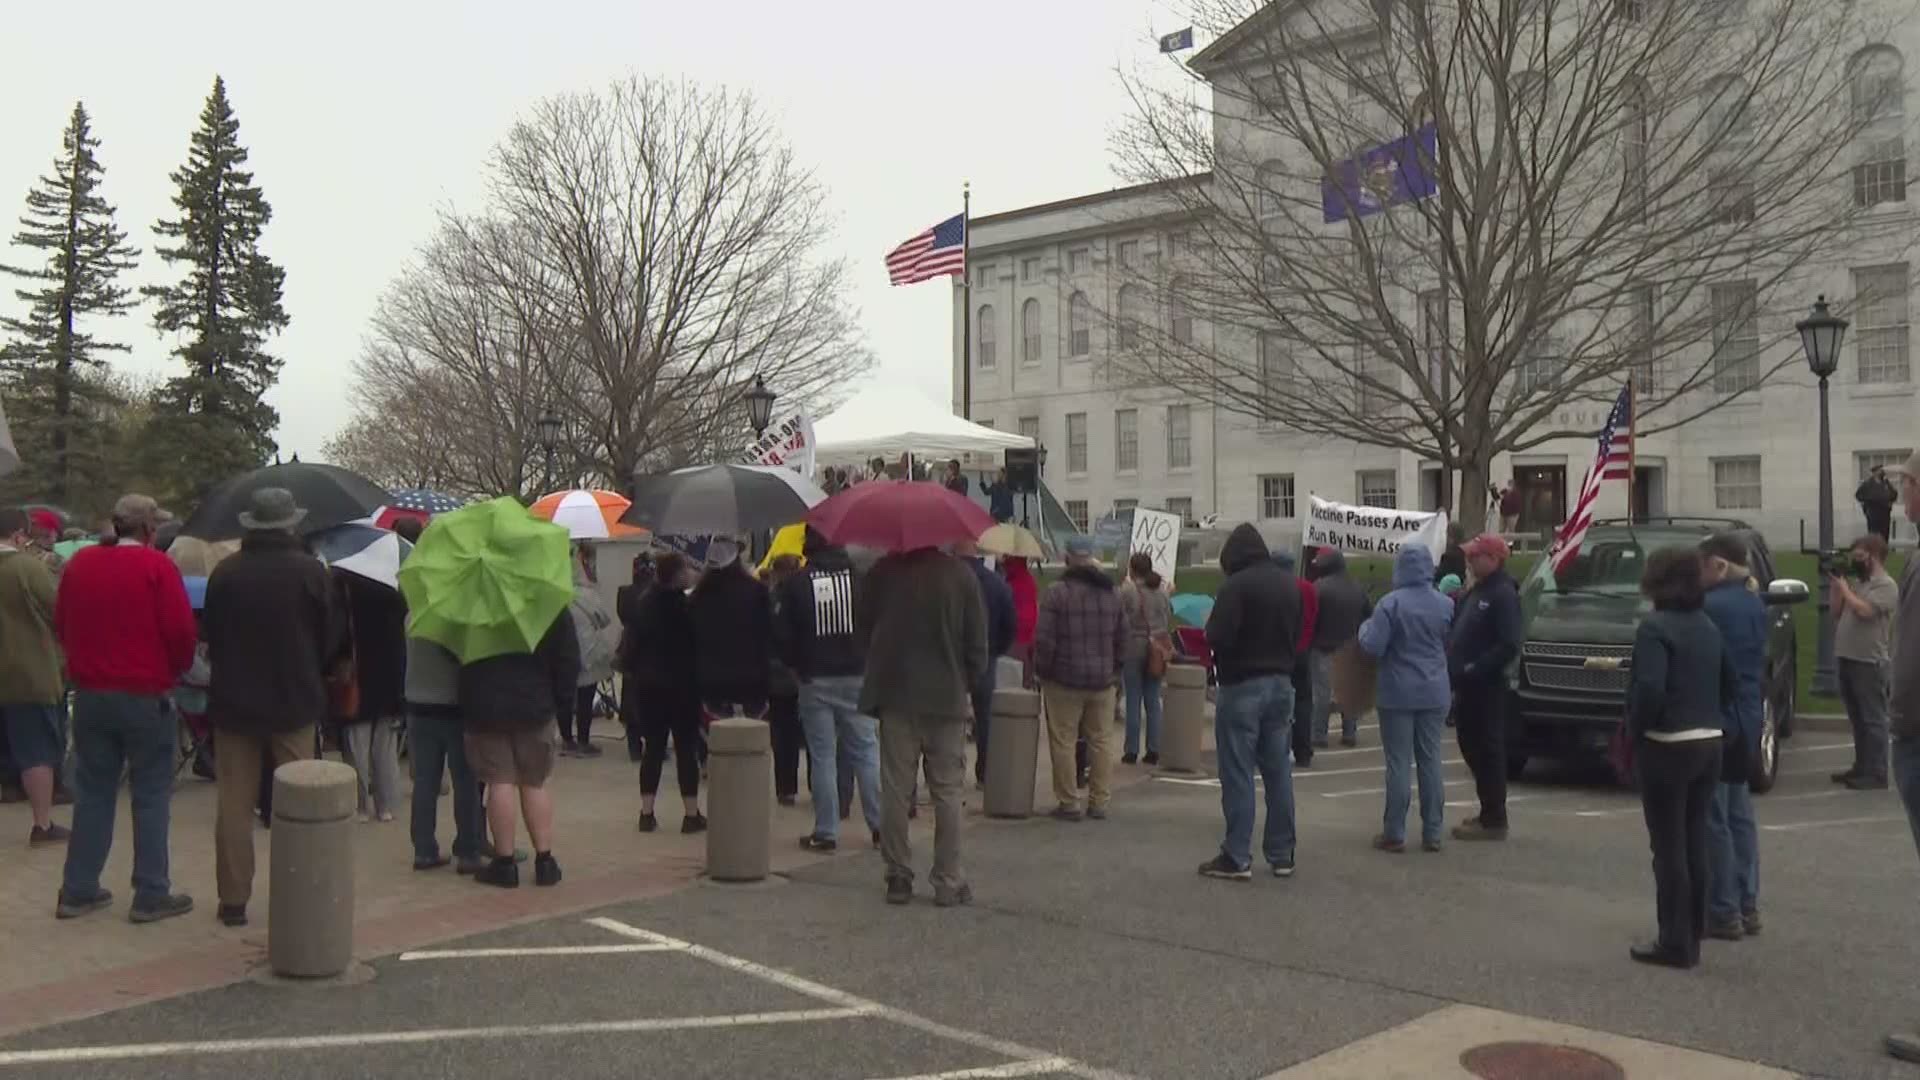 Just one day after Gov. Mills lifted the state's mask mandate, hundreds gathered in Augusta - demanding more.